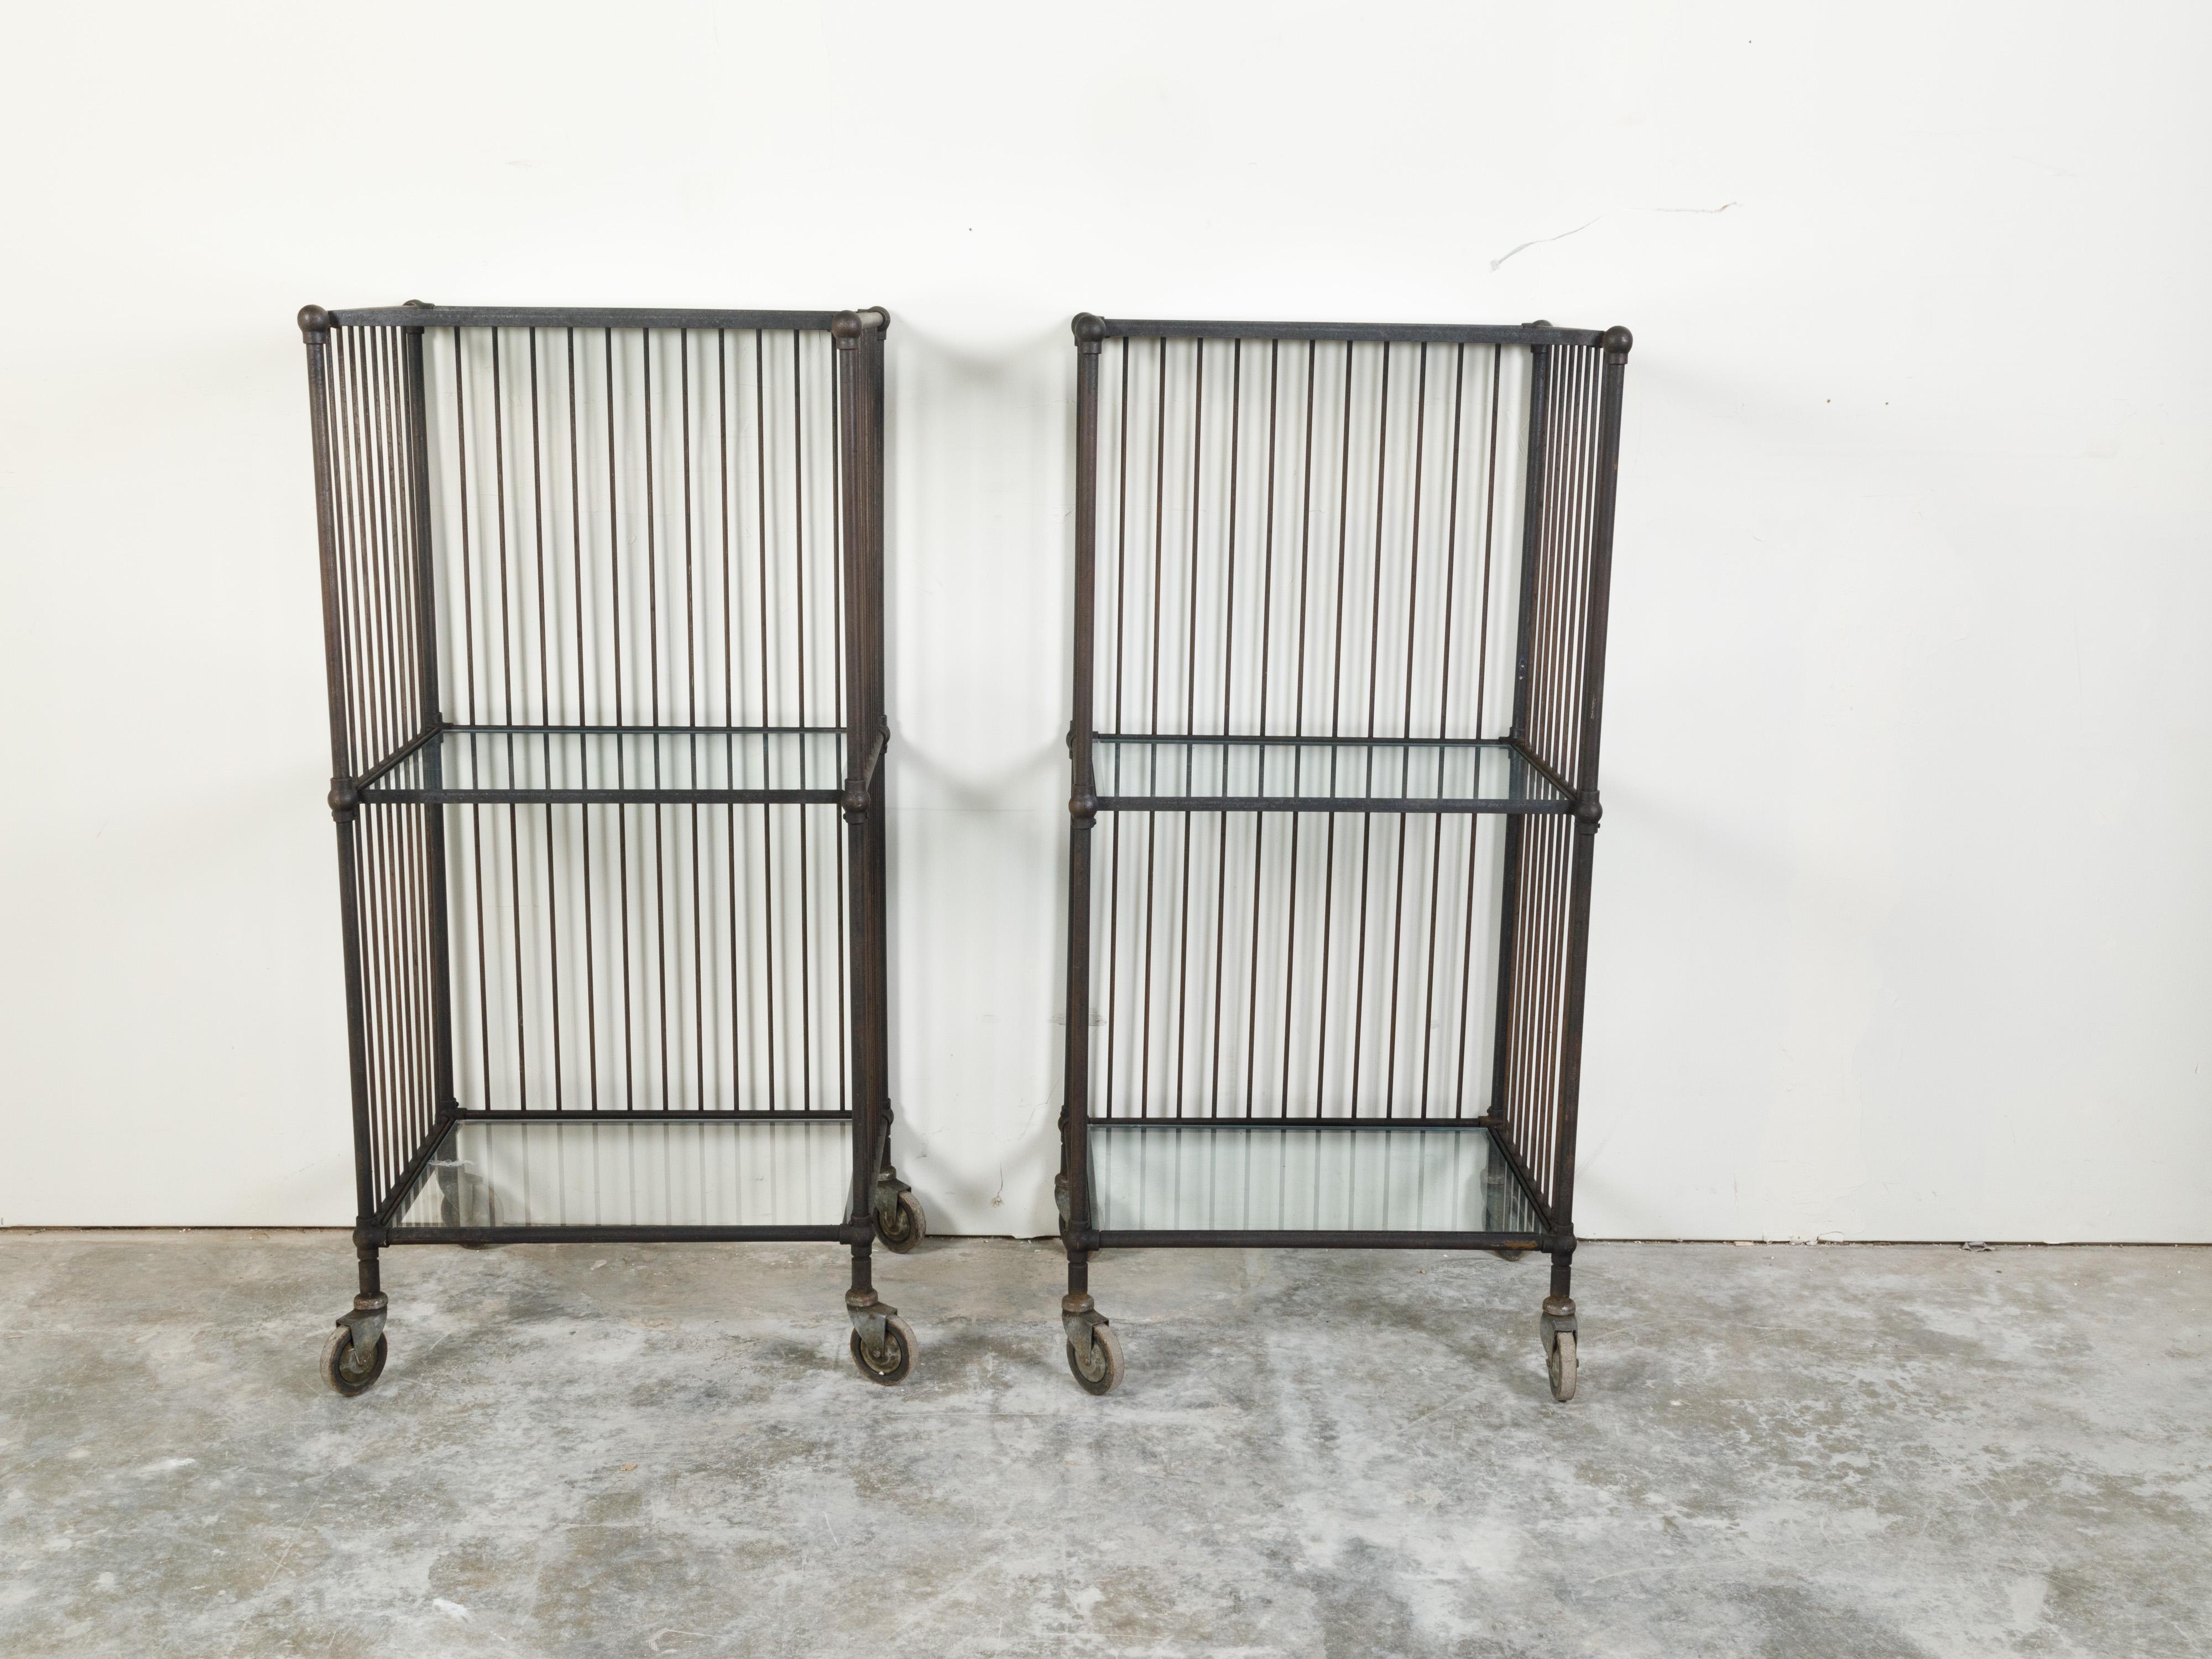 Two vintage industrial carts from the 20th century, with glass shelves and casters, priced and sold $5,400 each. Created during the 20th century, each of this pair of carts captures our attention with their clean lines and industrial look. Each